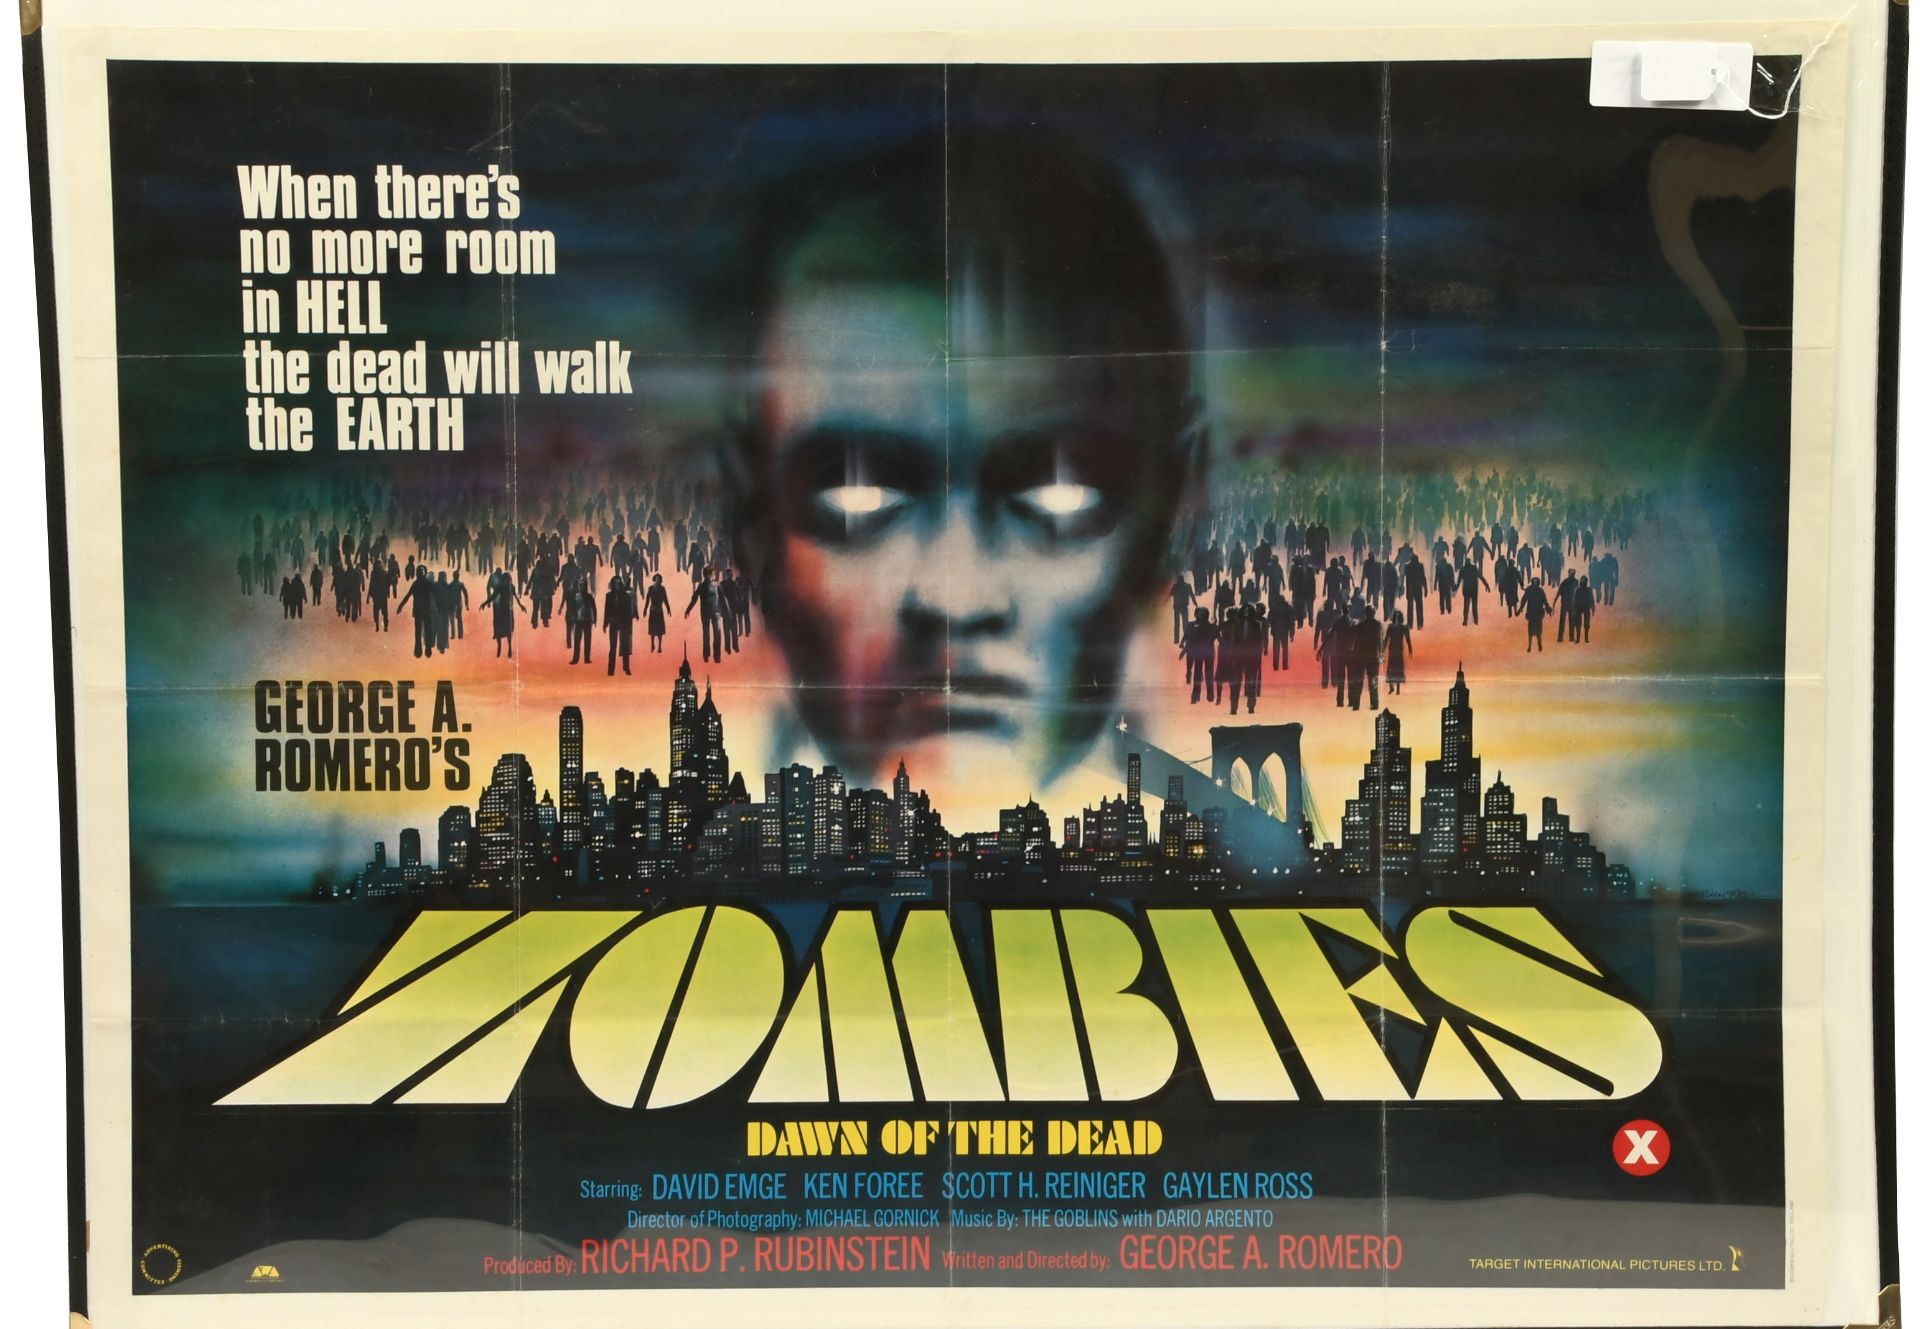 George A. Romero's Zombies Dawn of the Dead 1978 movie poster